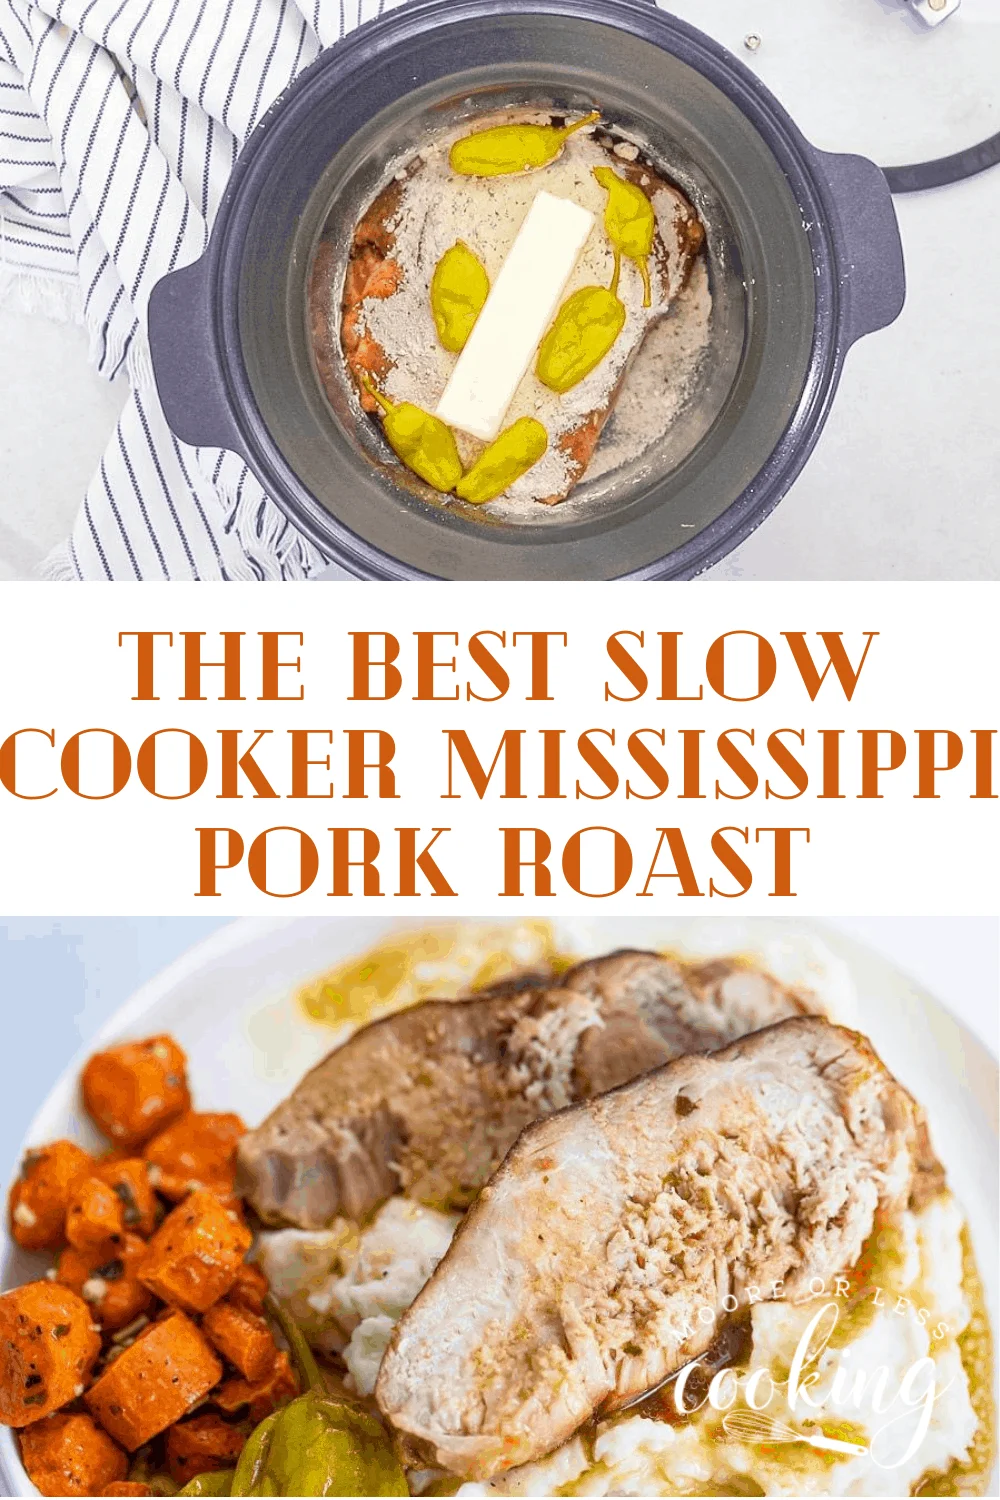 Slow Cooker Mississippi Pork Roast is the most simple meal that is made in the slow cooker/crockpot. Just set it and forget it for a tender to the touch pork roast that is incredibly flavorful and melts in your mouth delicious. This Slow Cooker roast is savory, sweet, and spicy. Takes only 5 minutes to prep and can be paired with tons of sides.  via @Mooreorlesscook